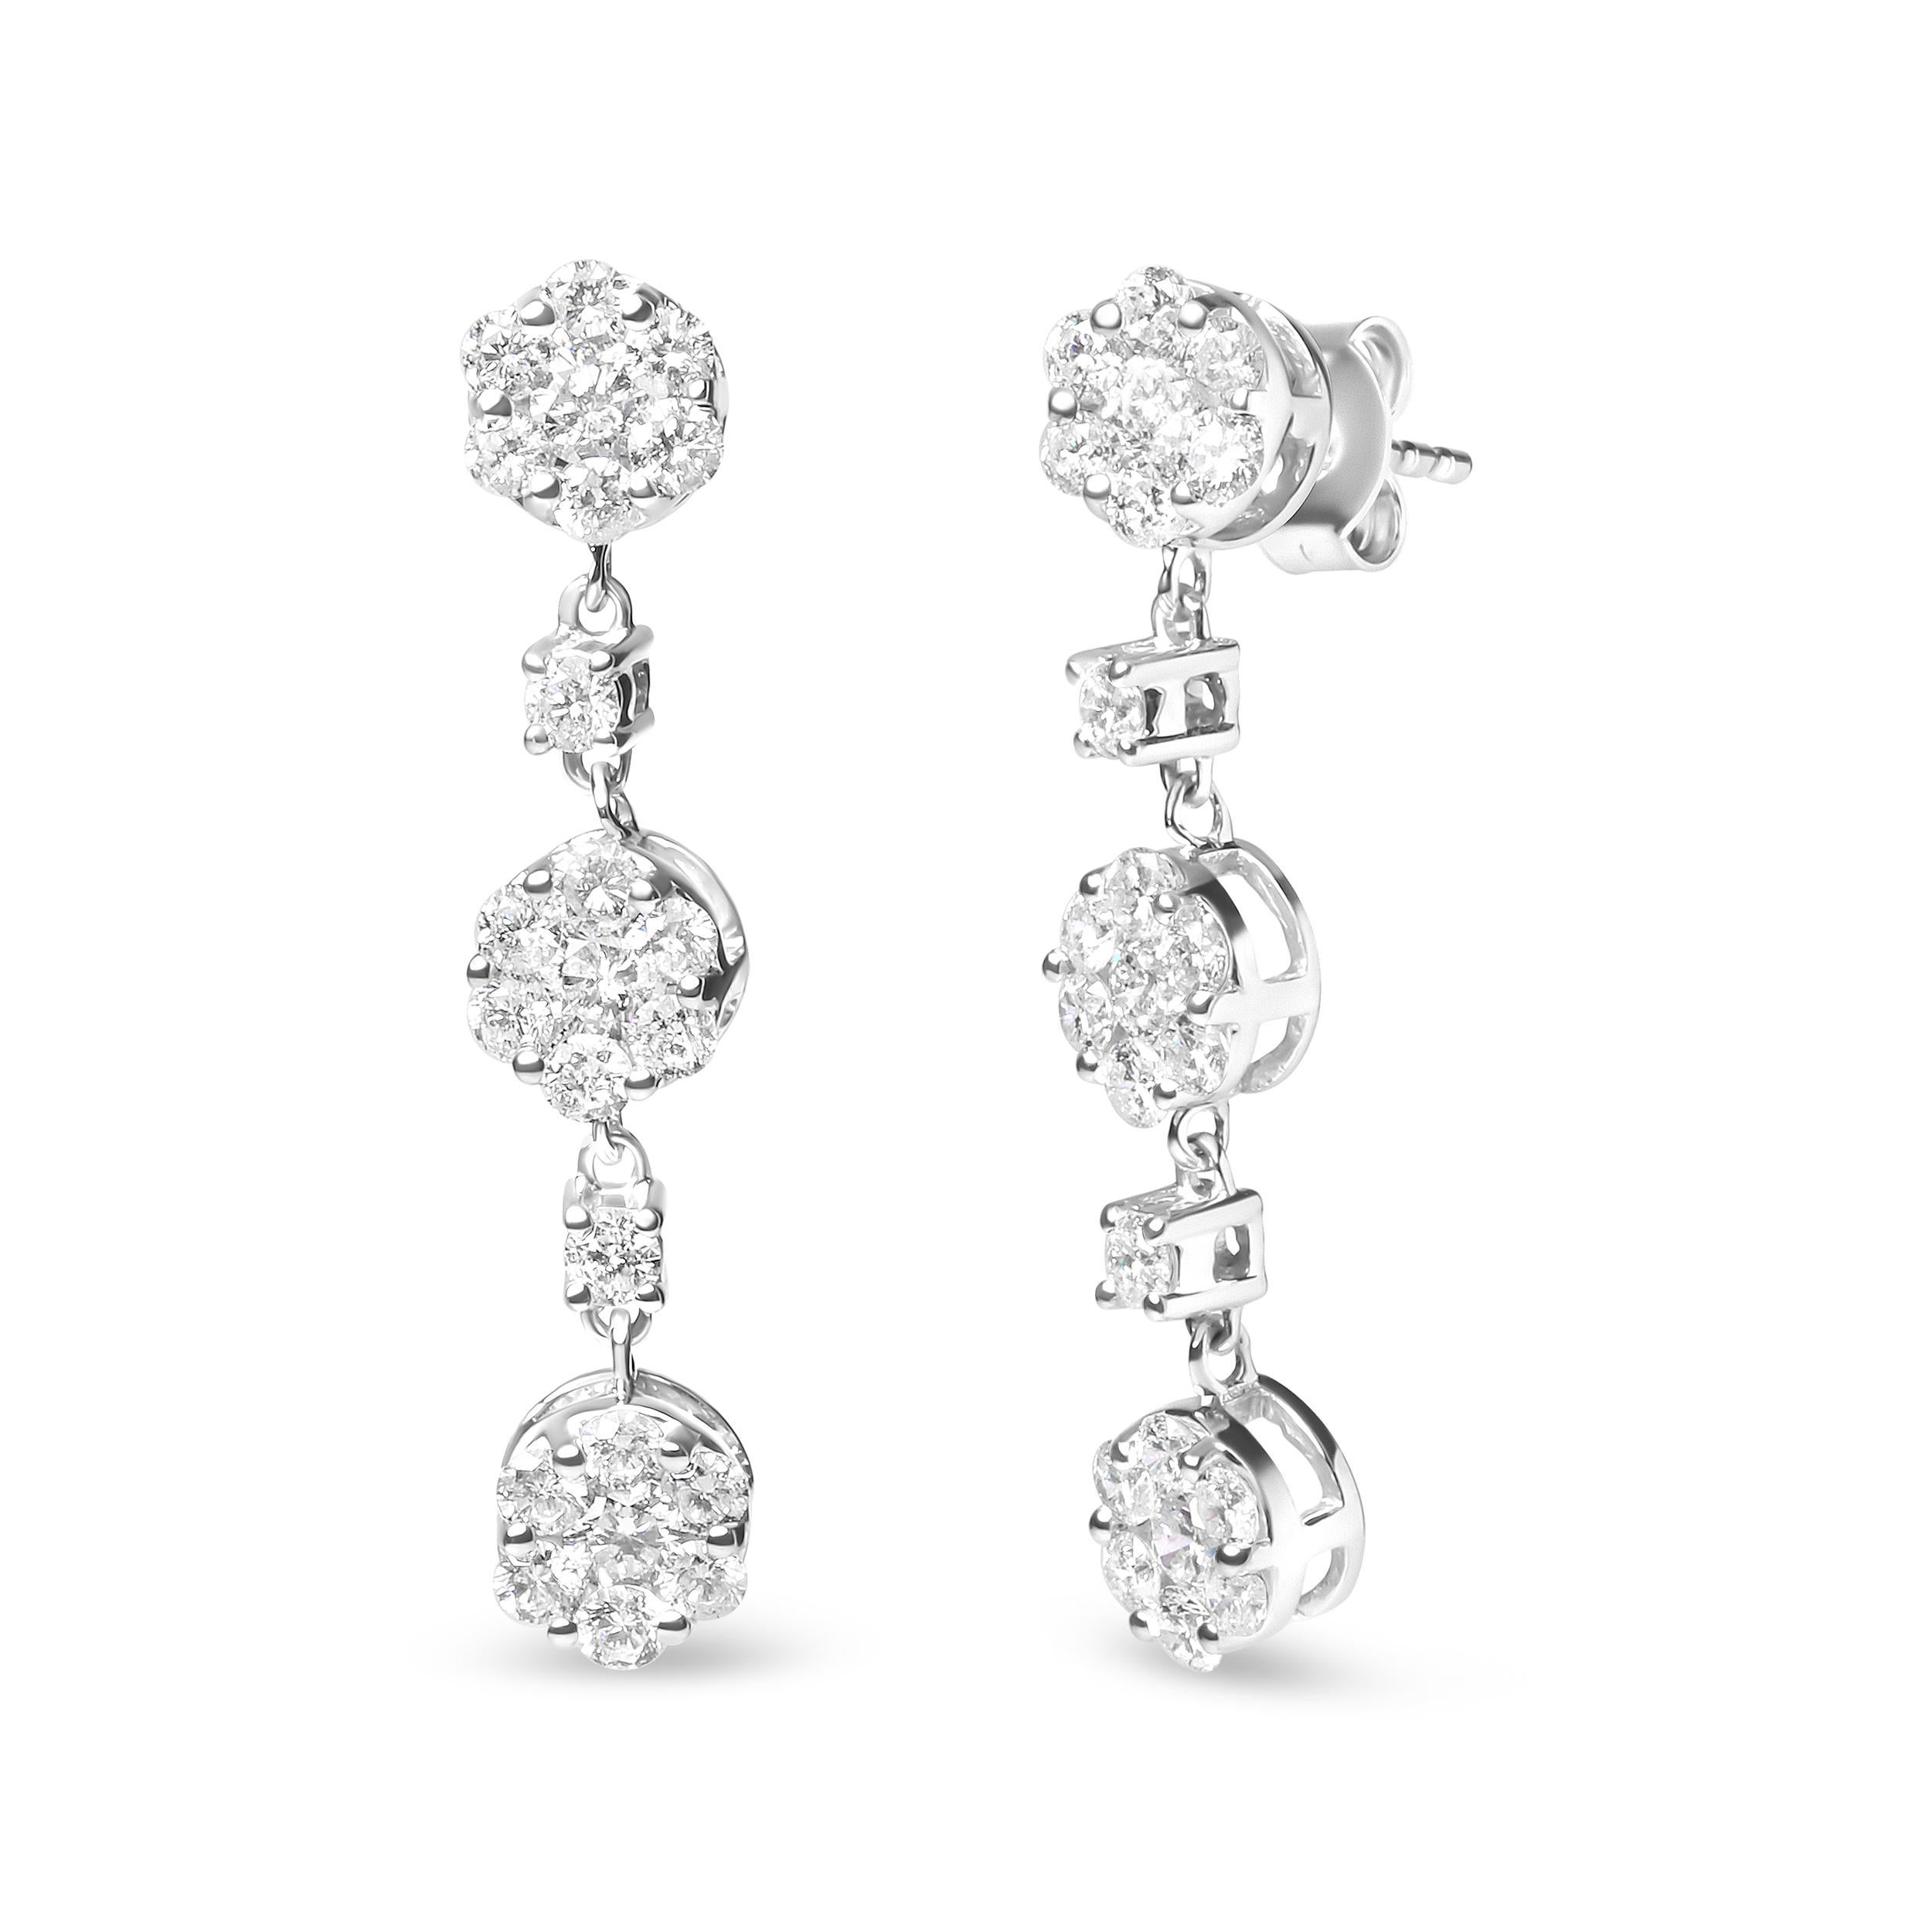 Indulge in the beauty of nature with these stunning 14K white gold floral drop earrings. Each earring features a mesmerizing composite cluster of 46 round diamonds, totaling 2.00 cttw. The diamonds, all natural in origin, boast a stunning I-J color